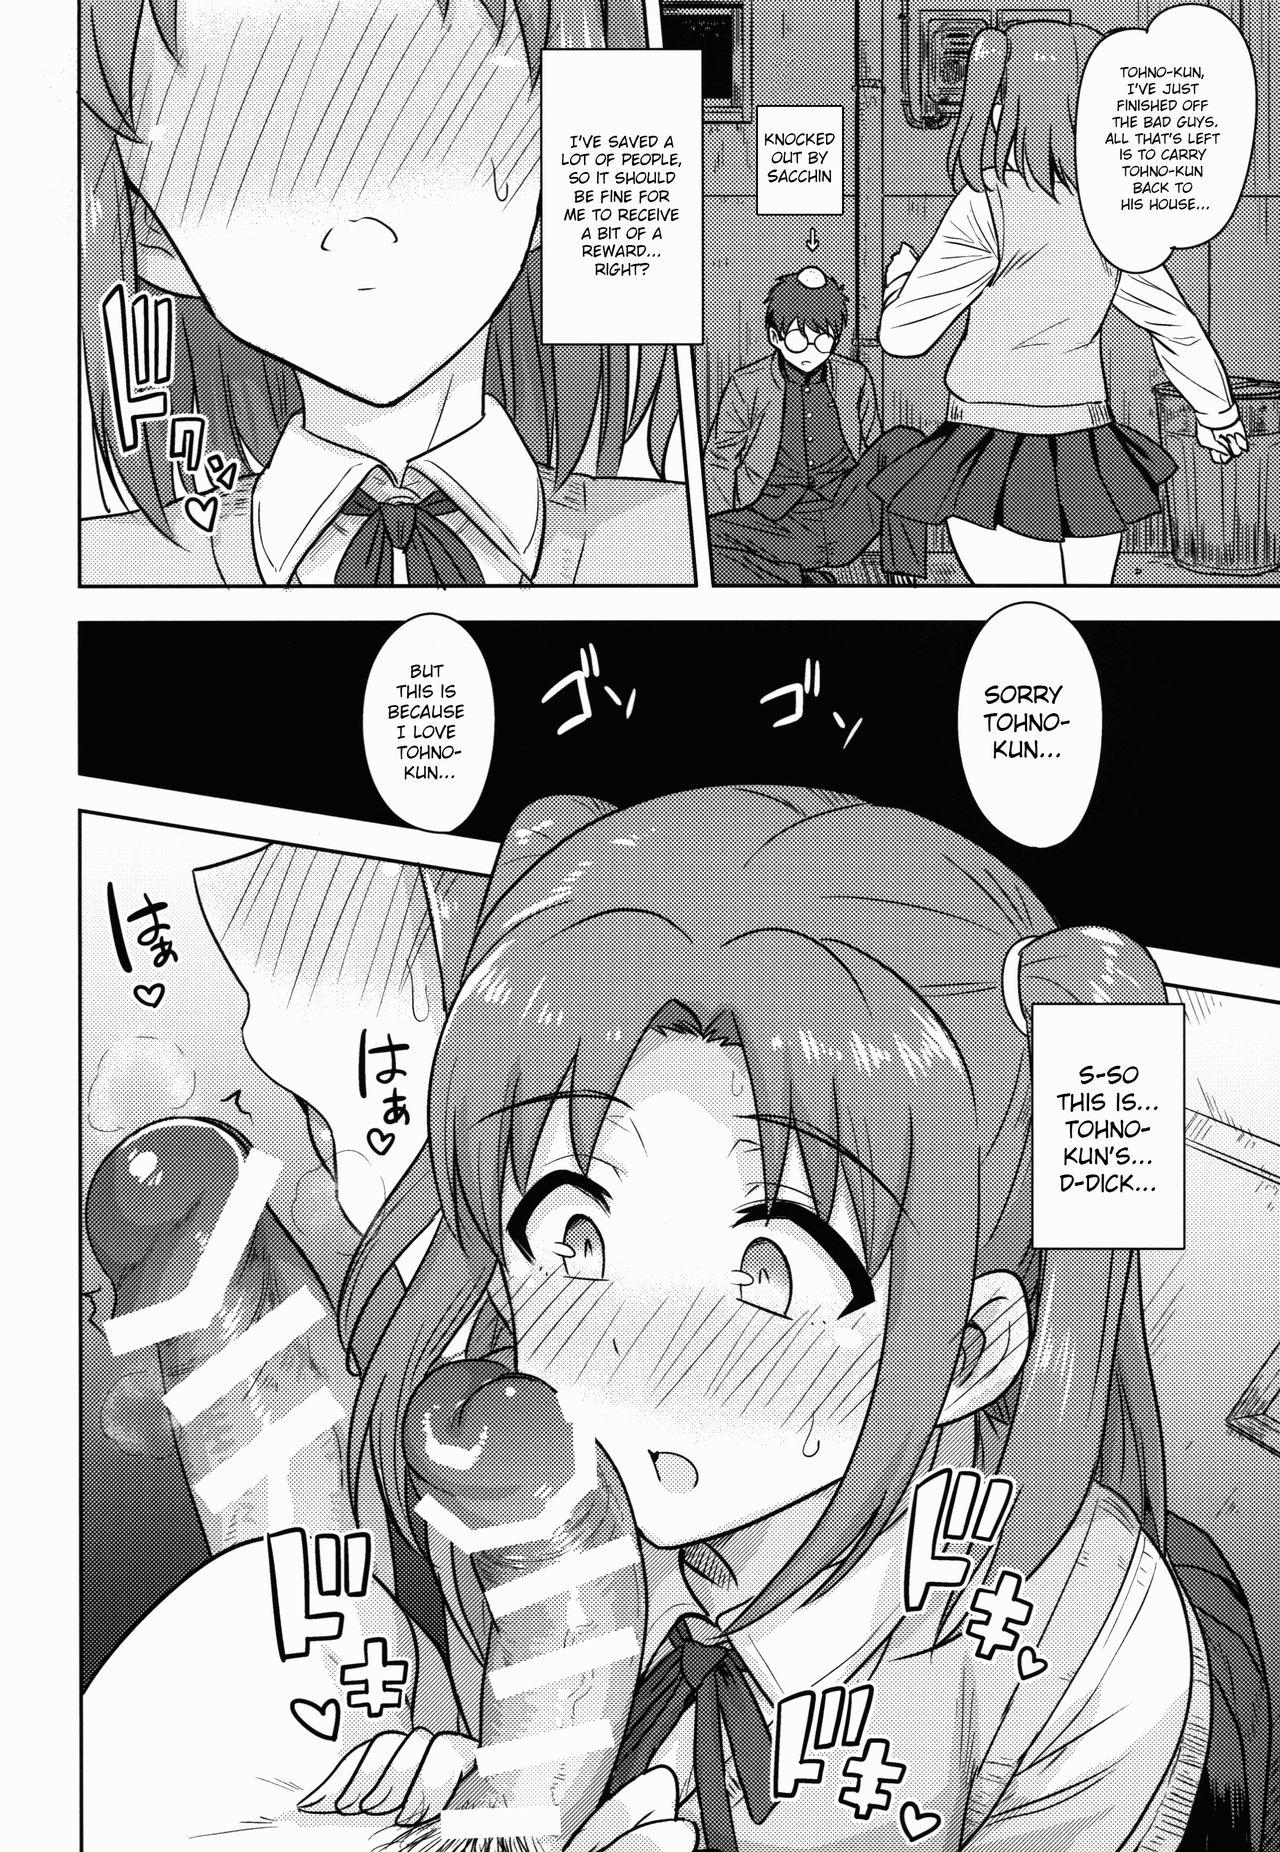 Lovers Aru Hi no Futari MelBlo Hen | A Certain Day with Each Other Melty Blood Hen - Tsukihime Ass Licking - Page 9